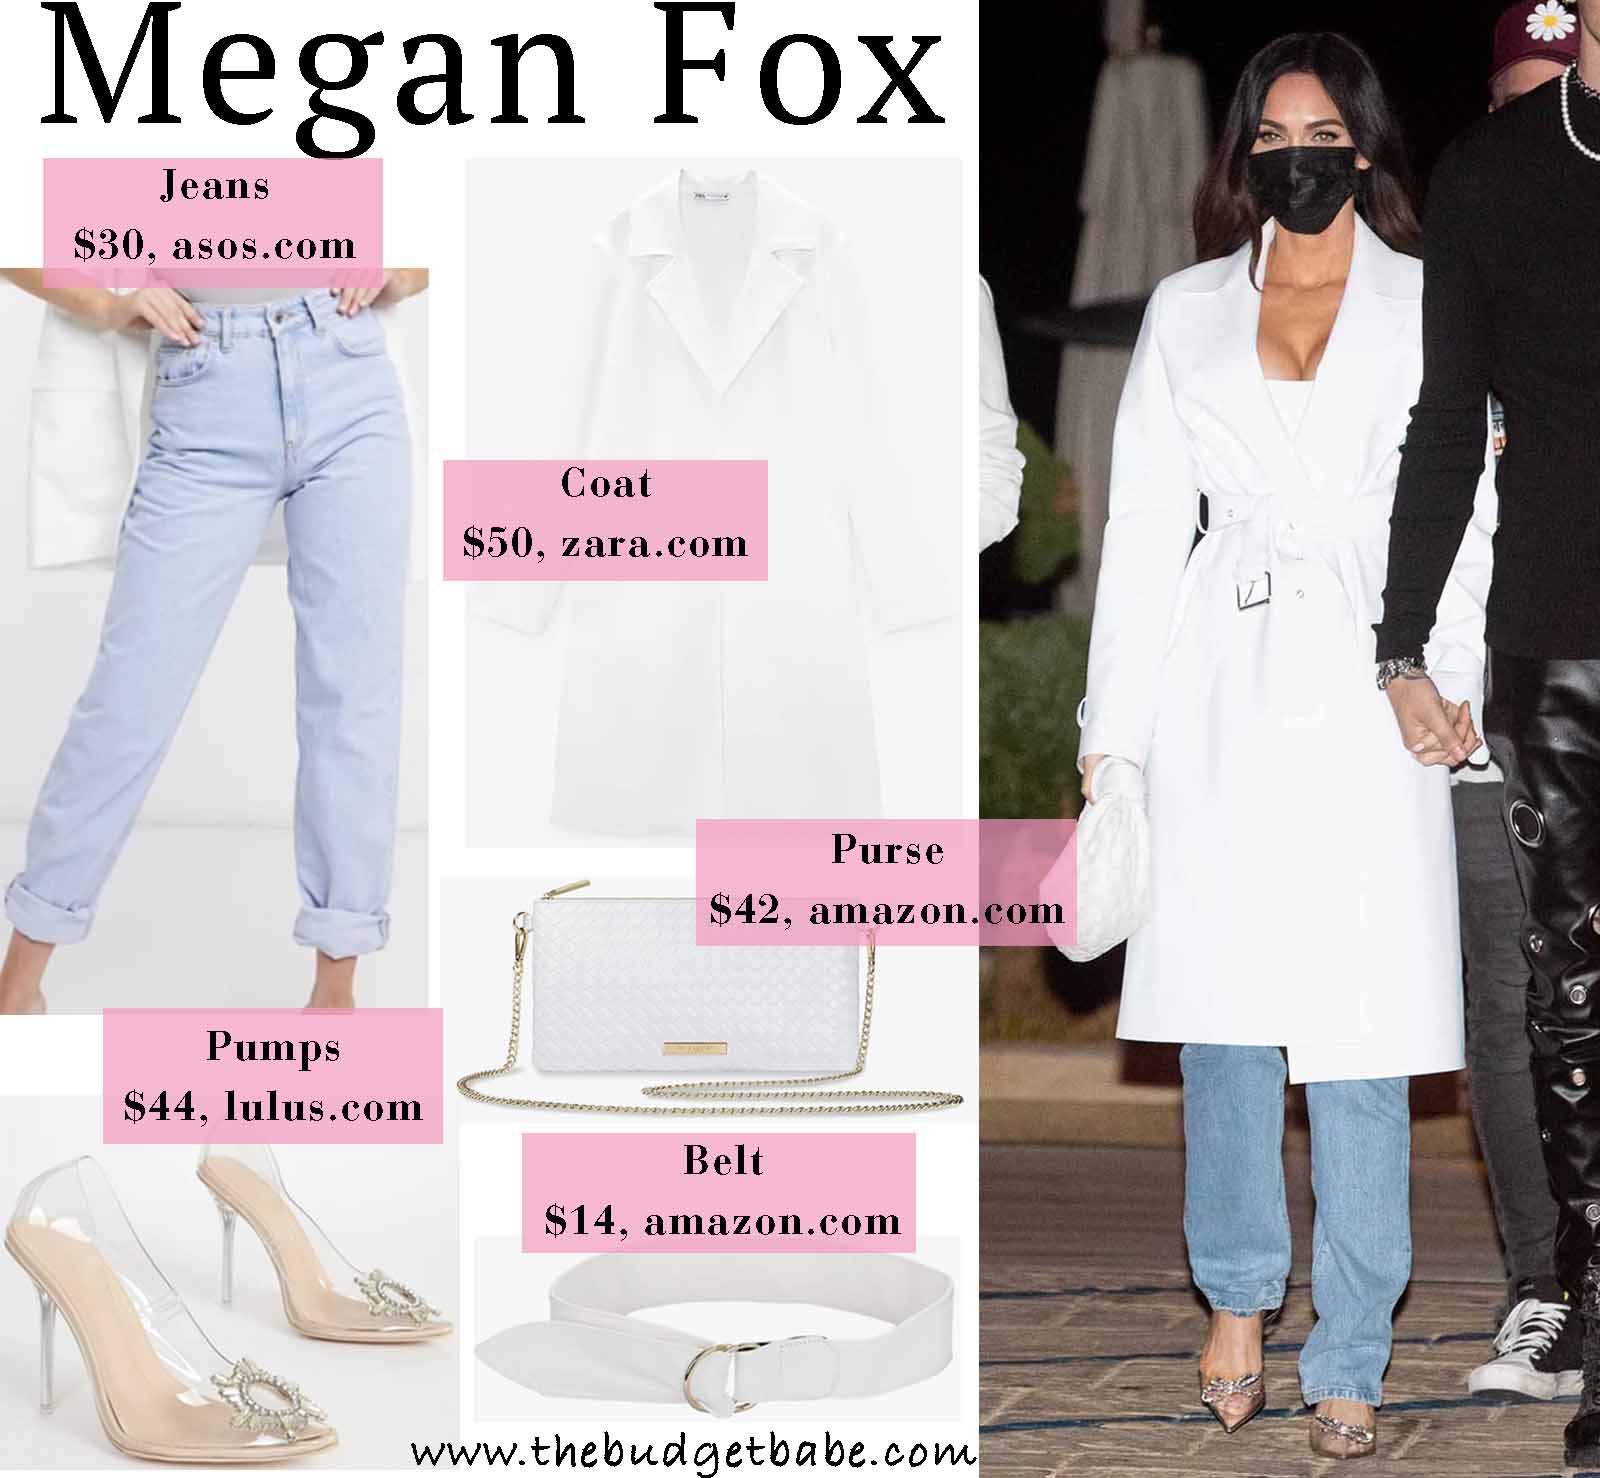 Megan's trench is so chic in white.